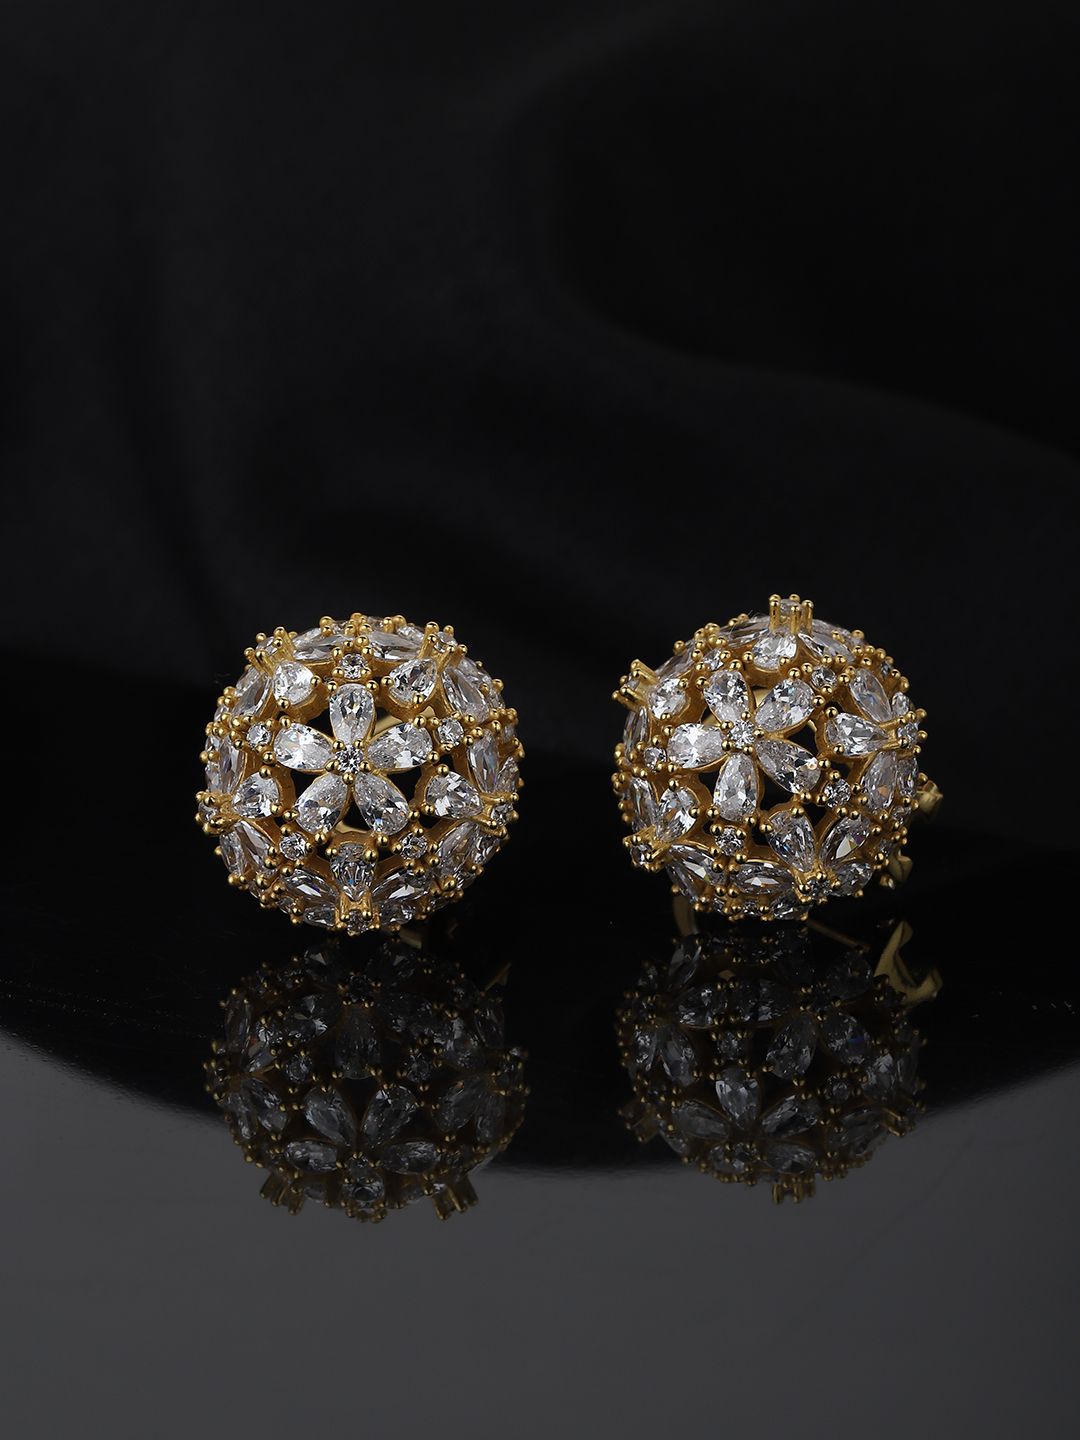 Carlton London Gold-Toned Floral Studs Earrings Price in India